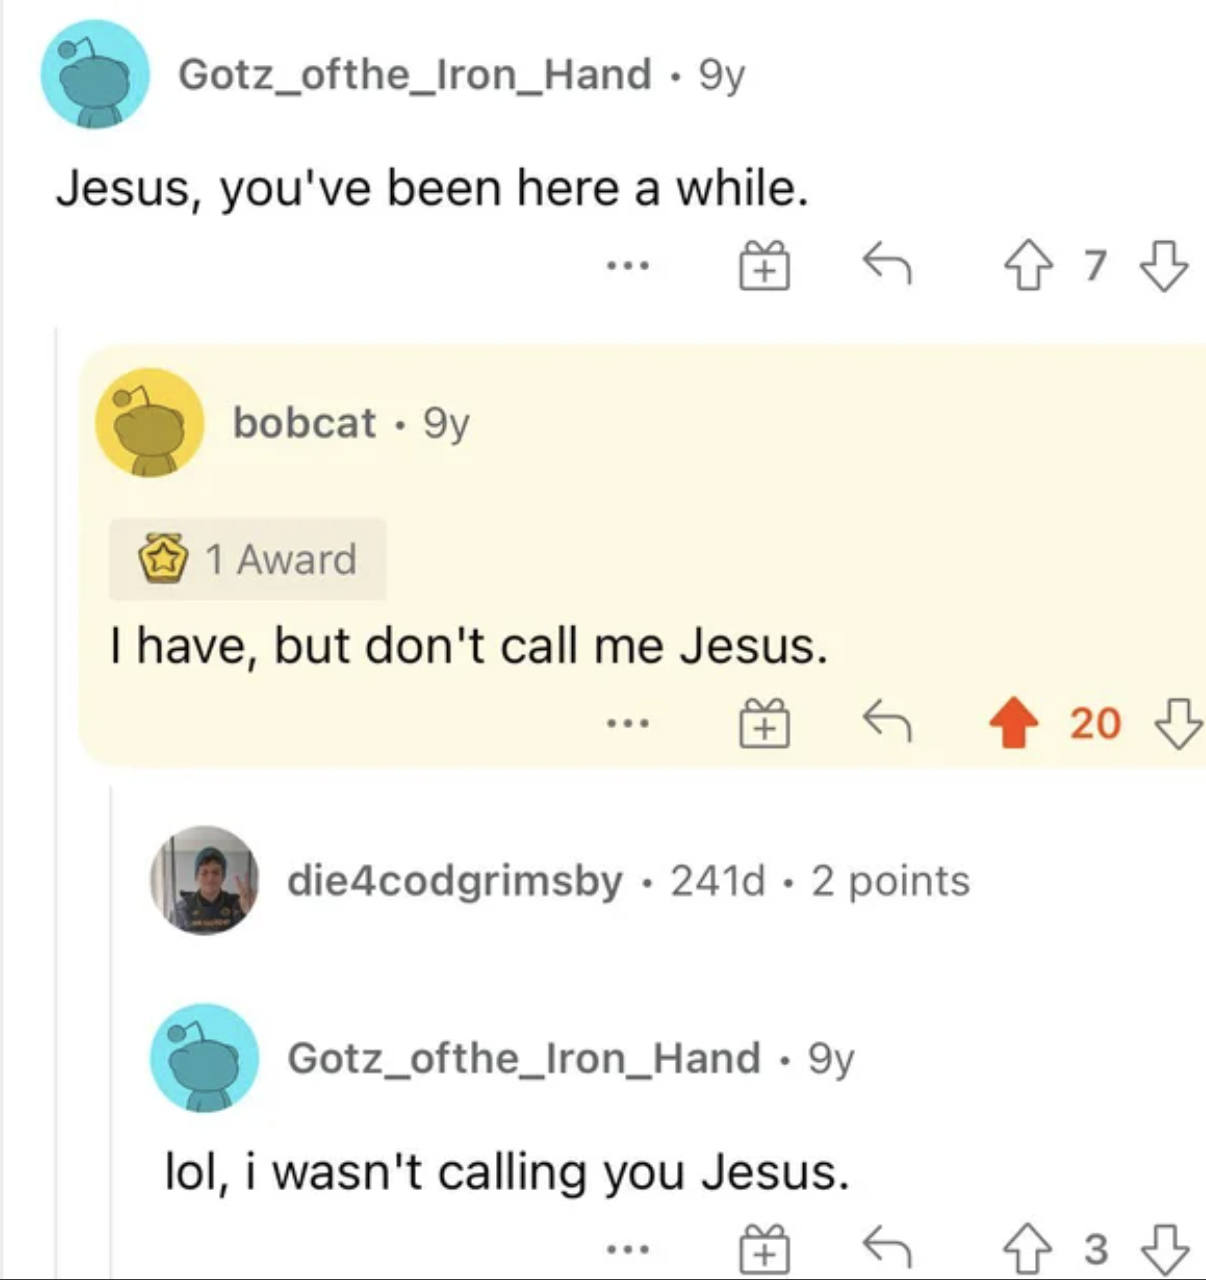 Didn't get the joke - Jesus, you've been here a while.